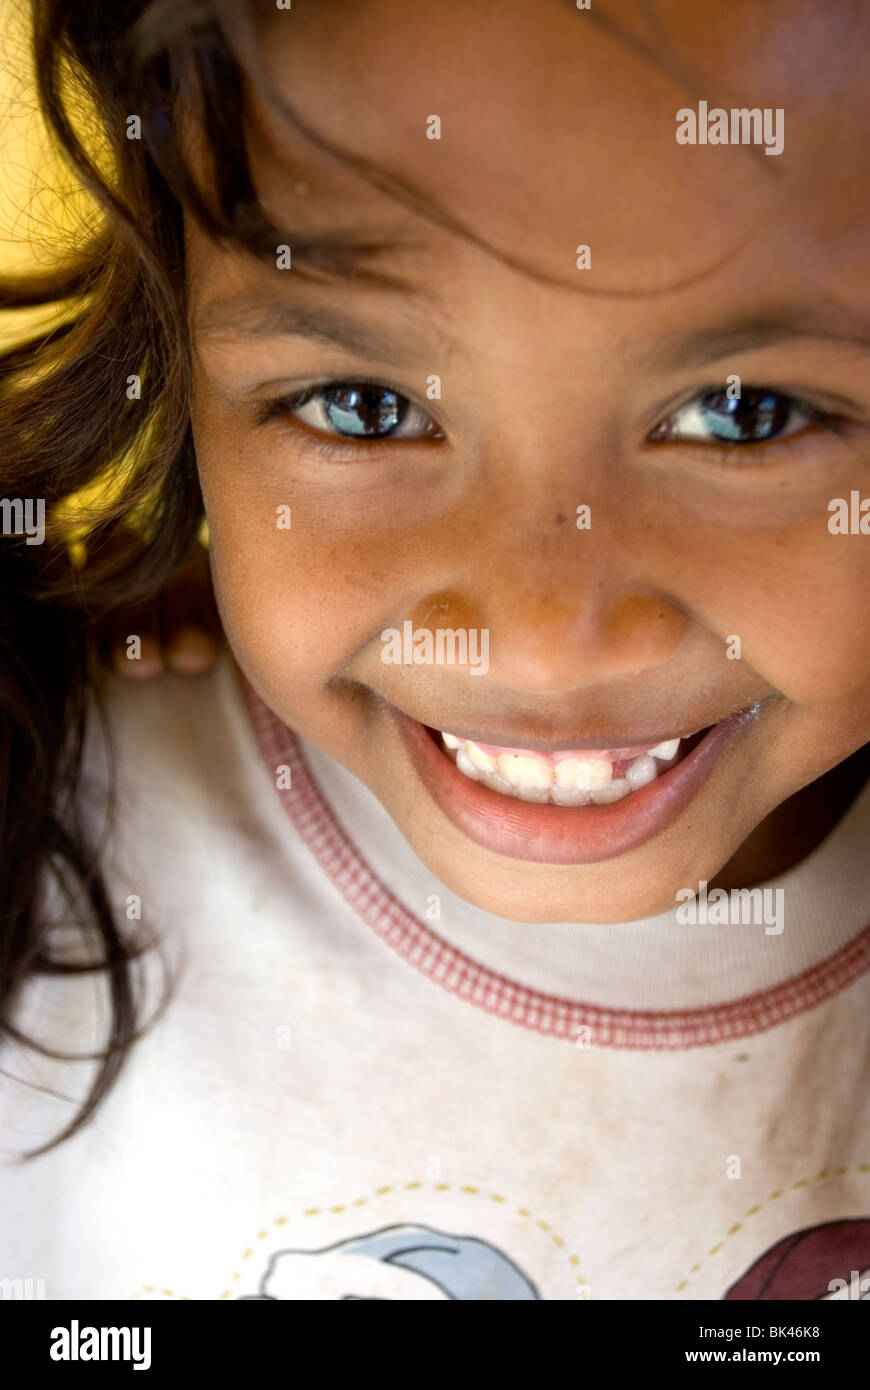 girl in kupang, west timor, indonesia Stock Photo